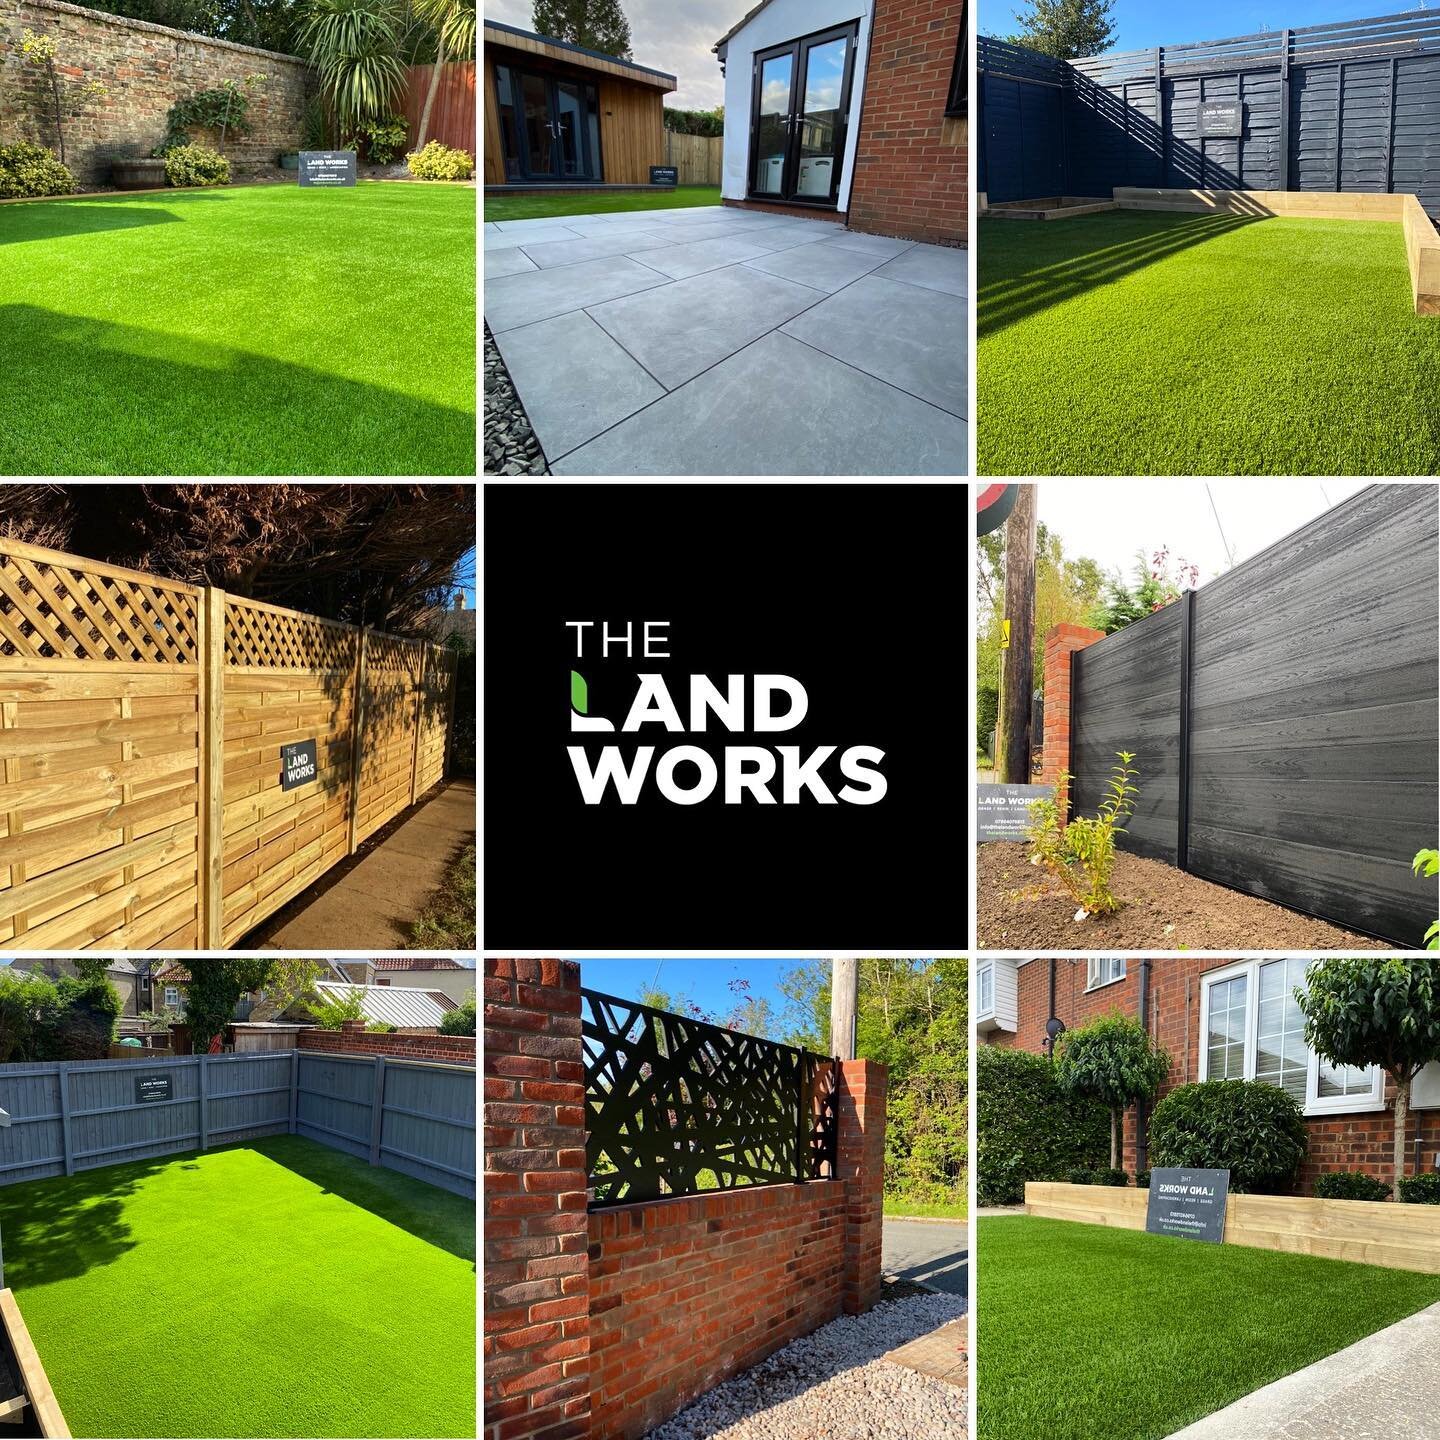 🌱Wishing our fellow followers, clients past present and new a happy and healthy 2021! 🌱#goodbye2020 #uptheworkers #cambridge #garden #artificialgrass #landscaping #cheers